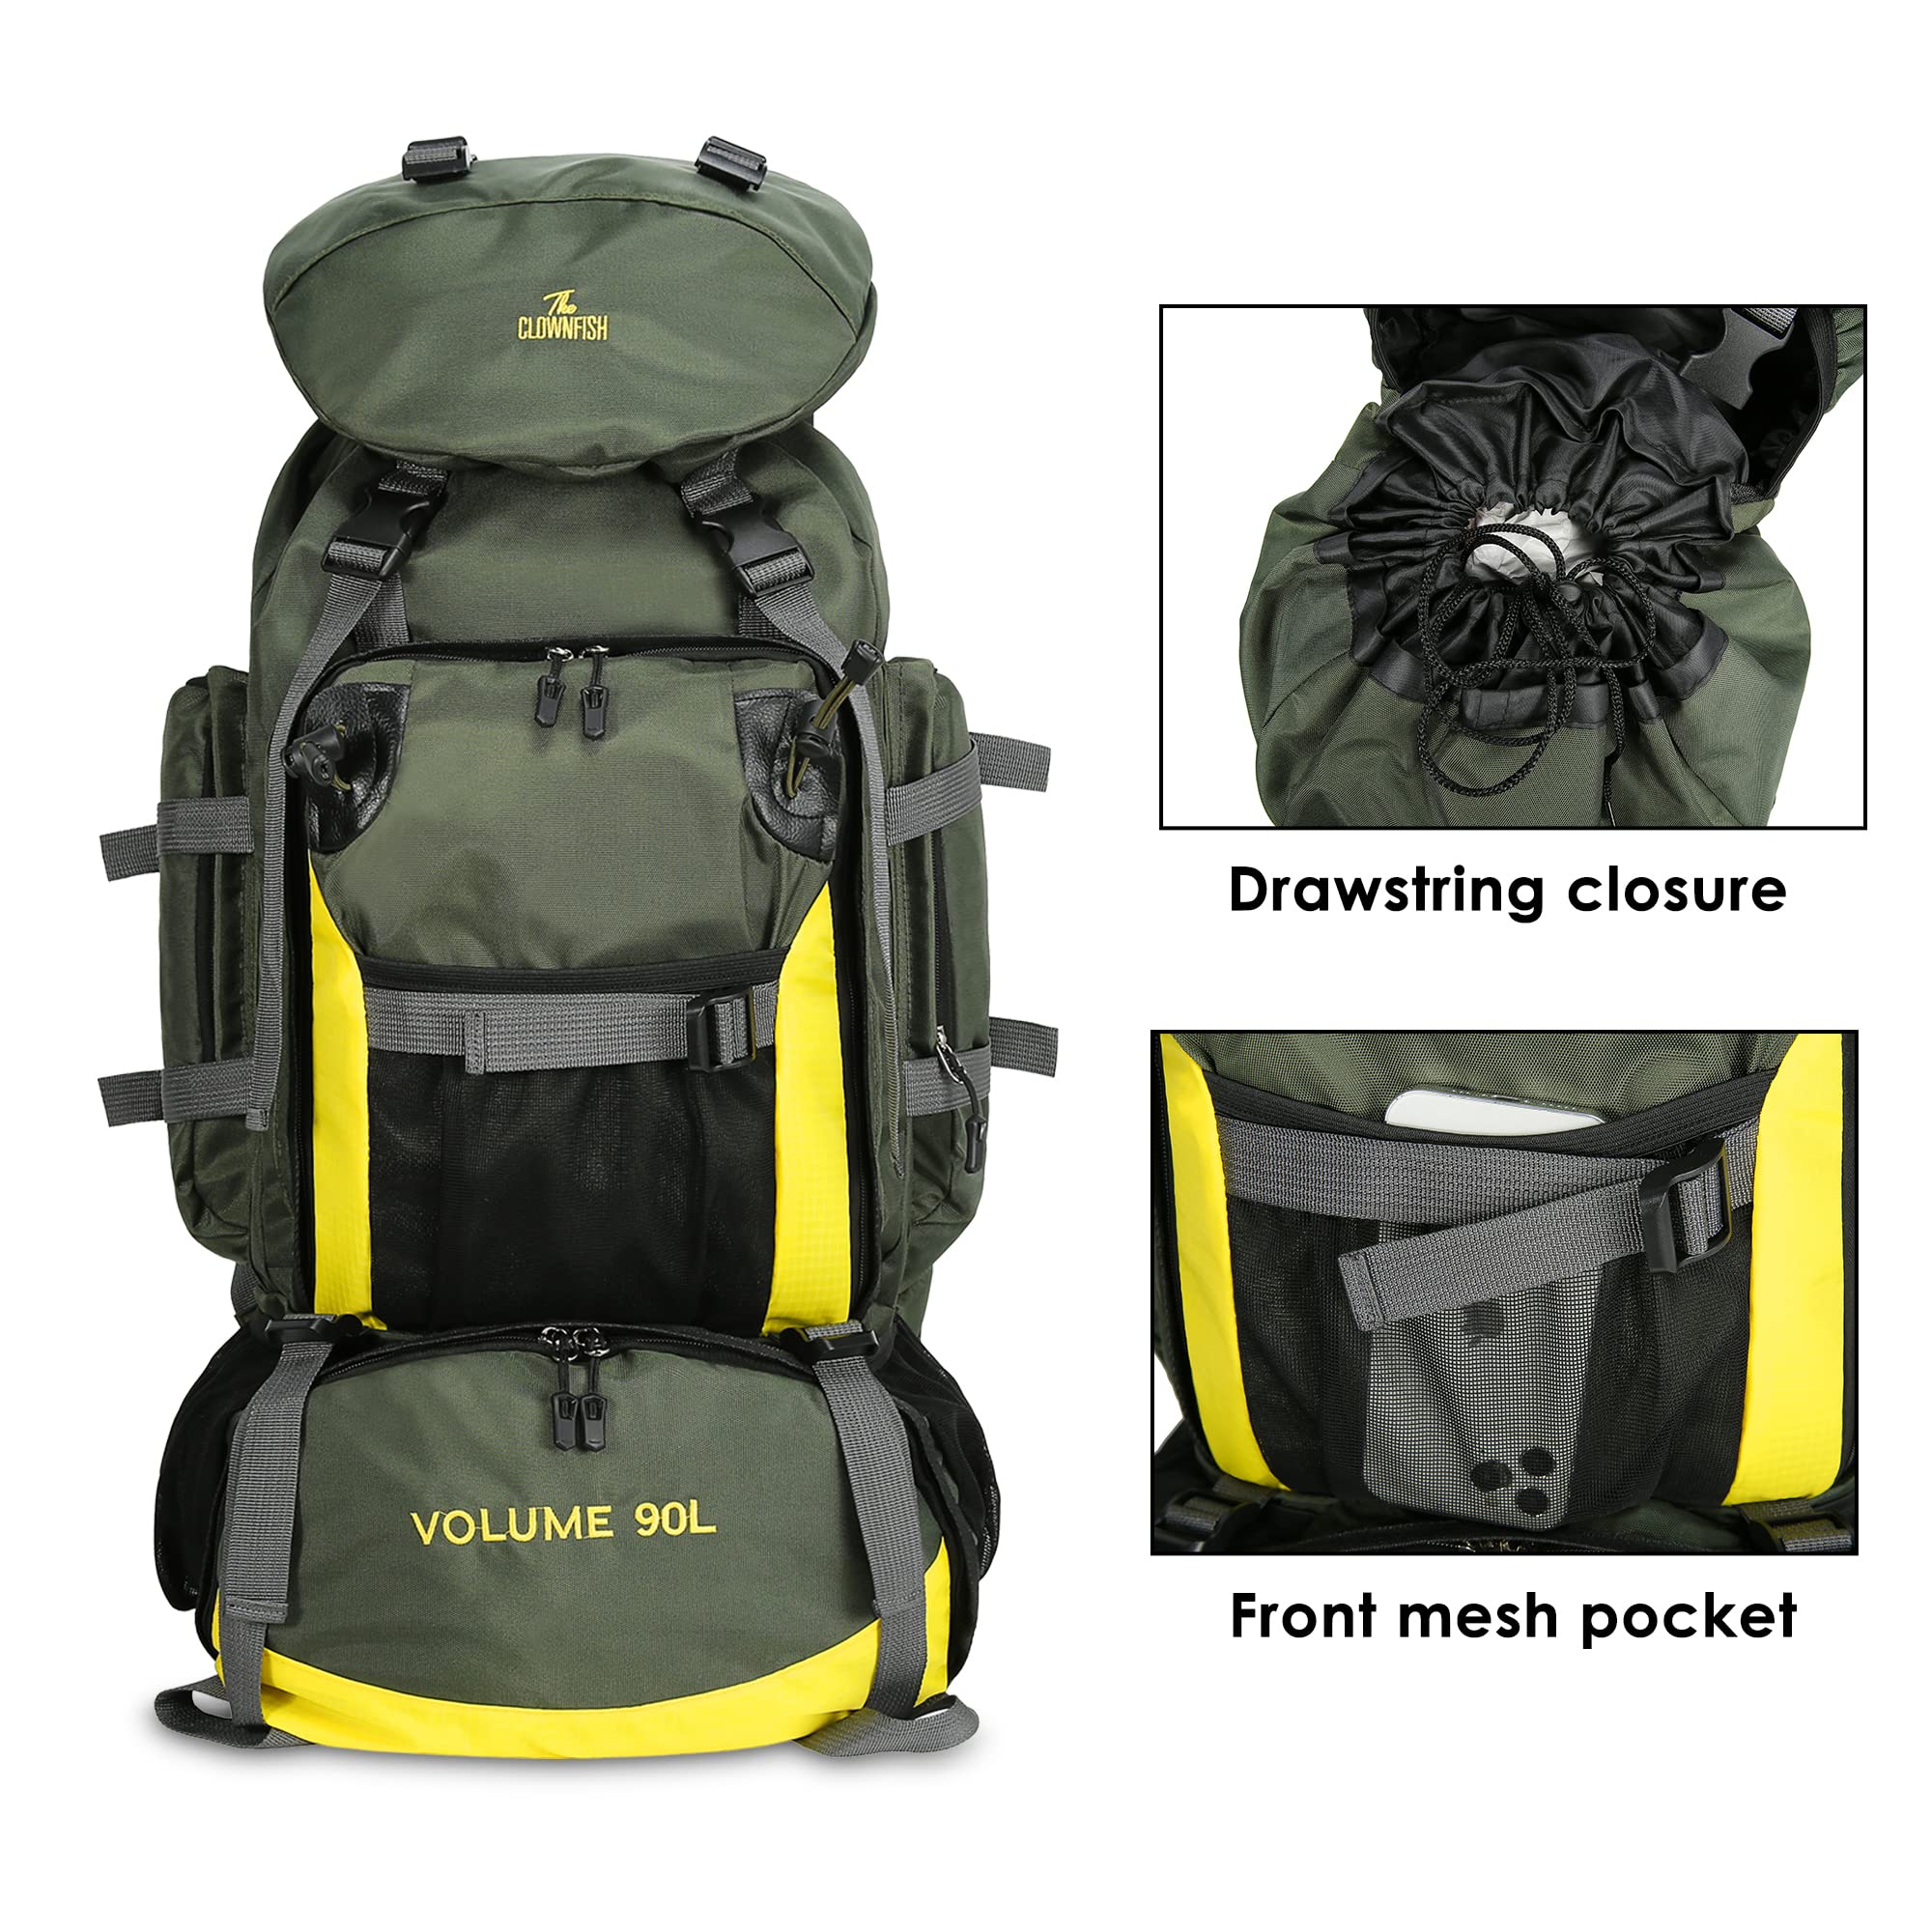 THE CLOWNFISH Summit Seeker 90 Litres Polyester Travel Backpack for Mountaineering Outdoor Sport Camp Hiking Trekking Bag Camping Rucksack Bagpack Bags (Green)